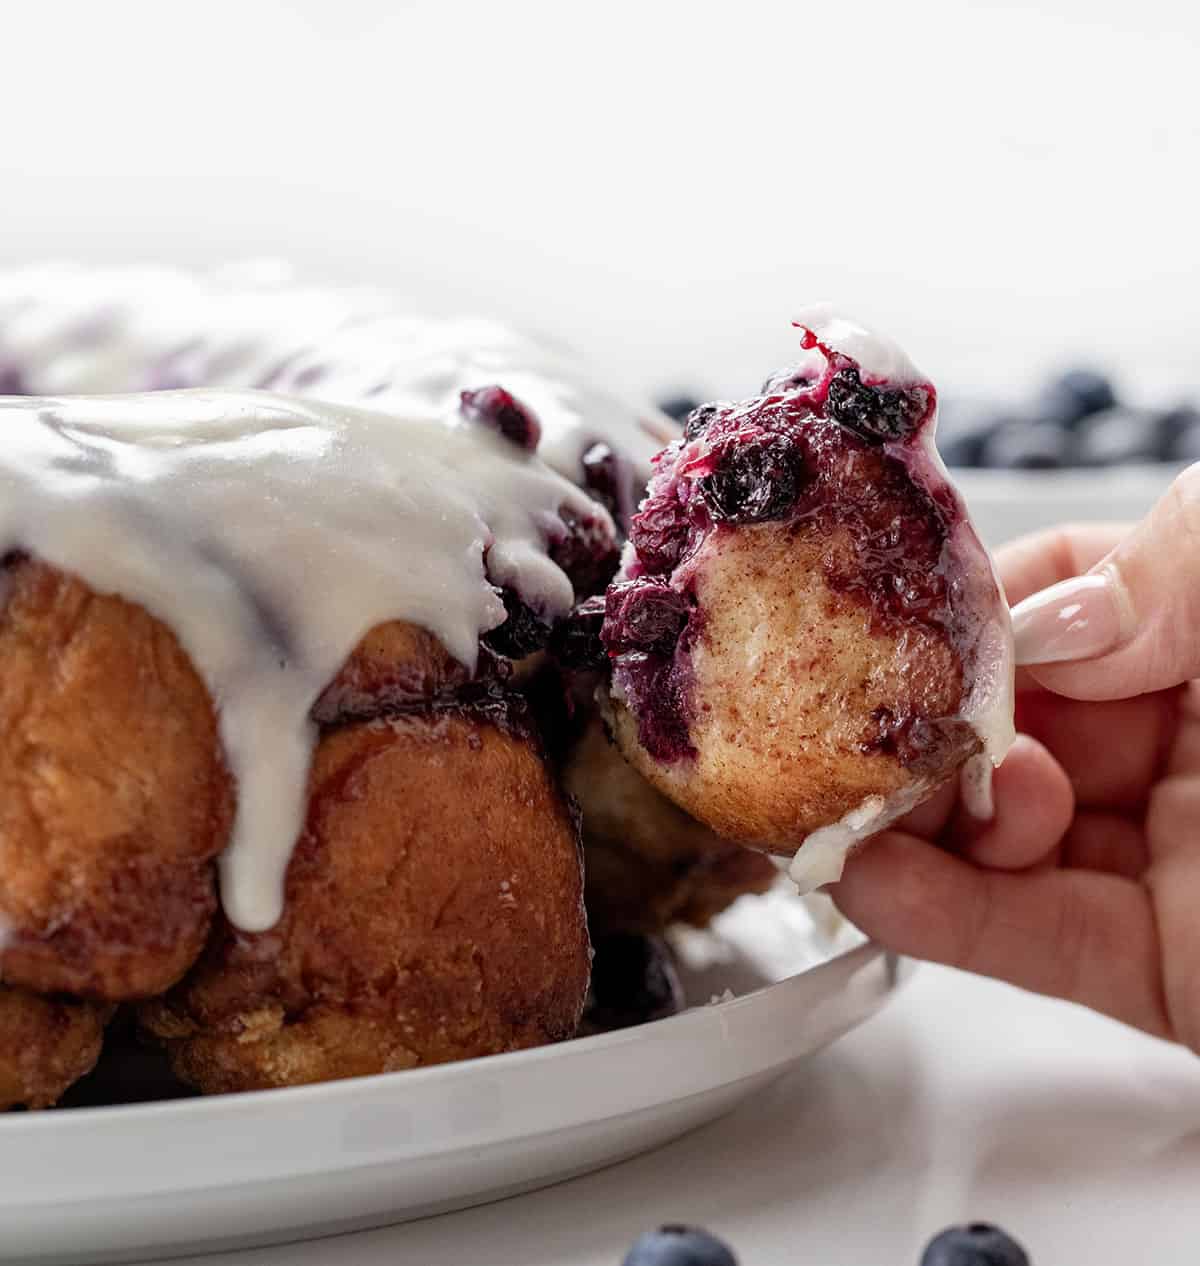 Hand picking up a piece of Blueberry Monkey Bread from the plate.